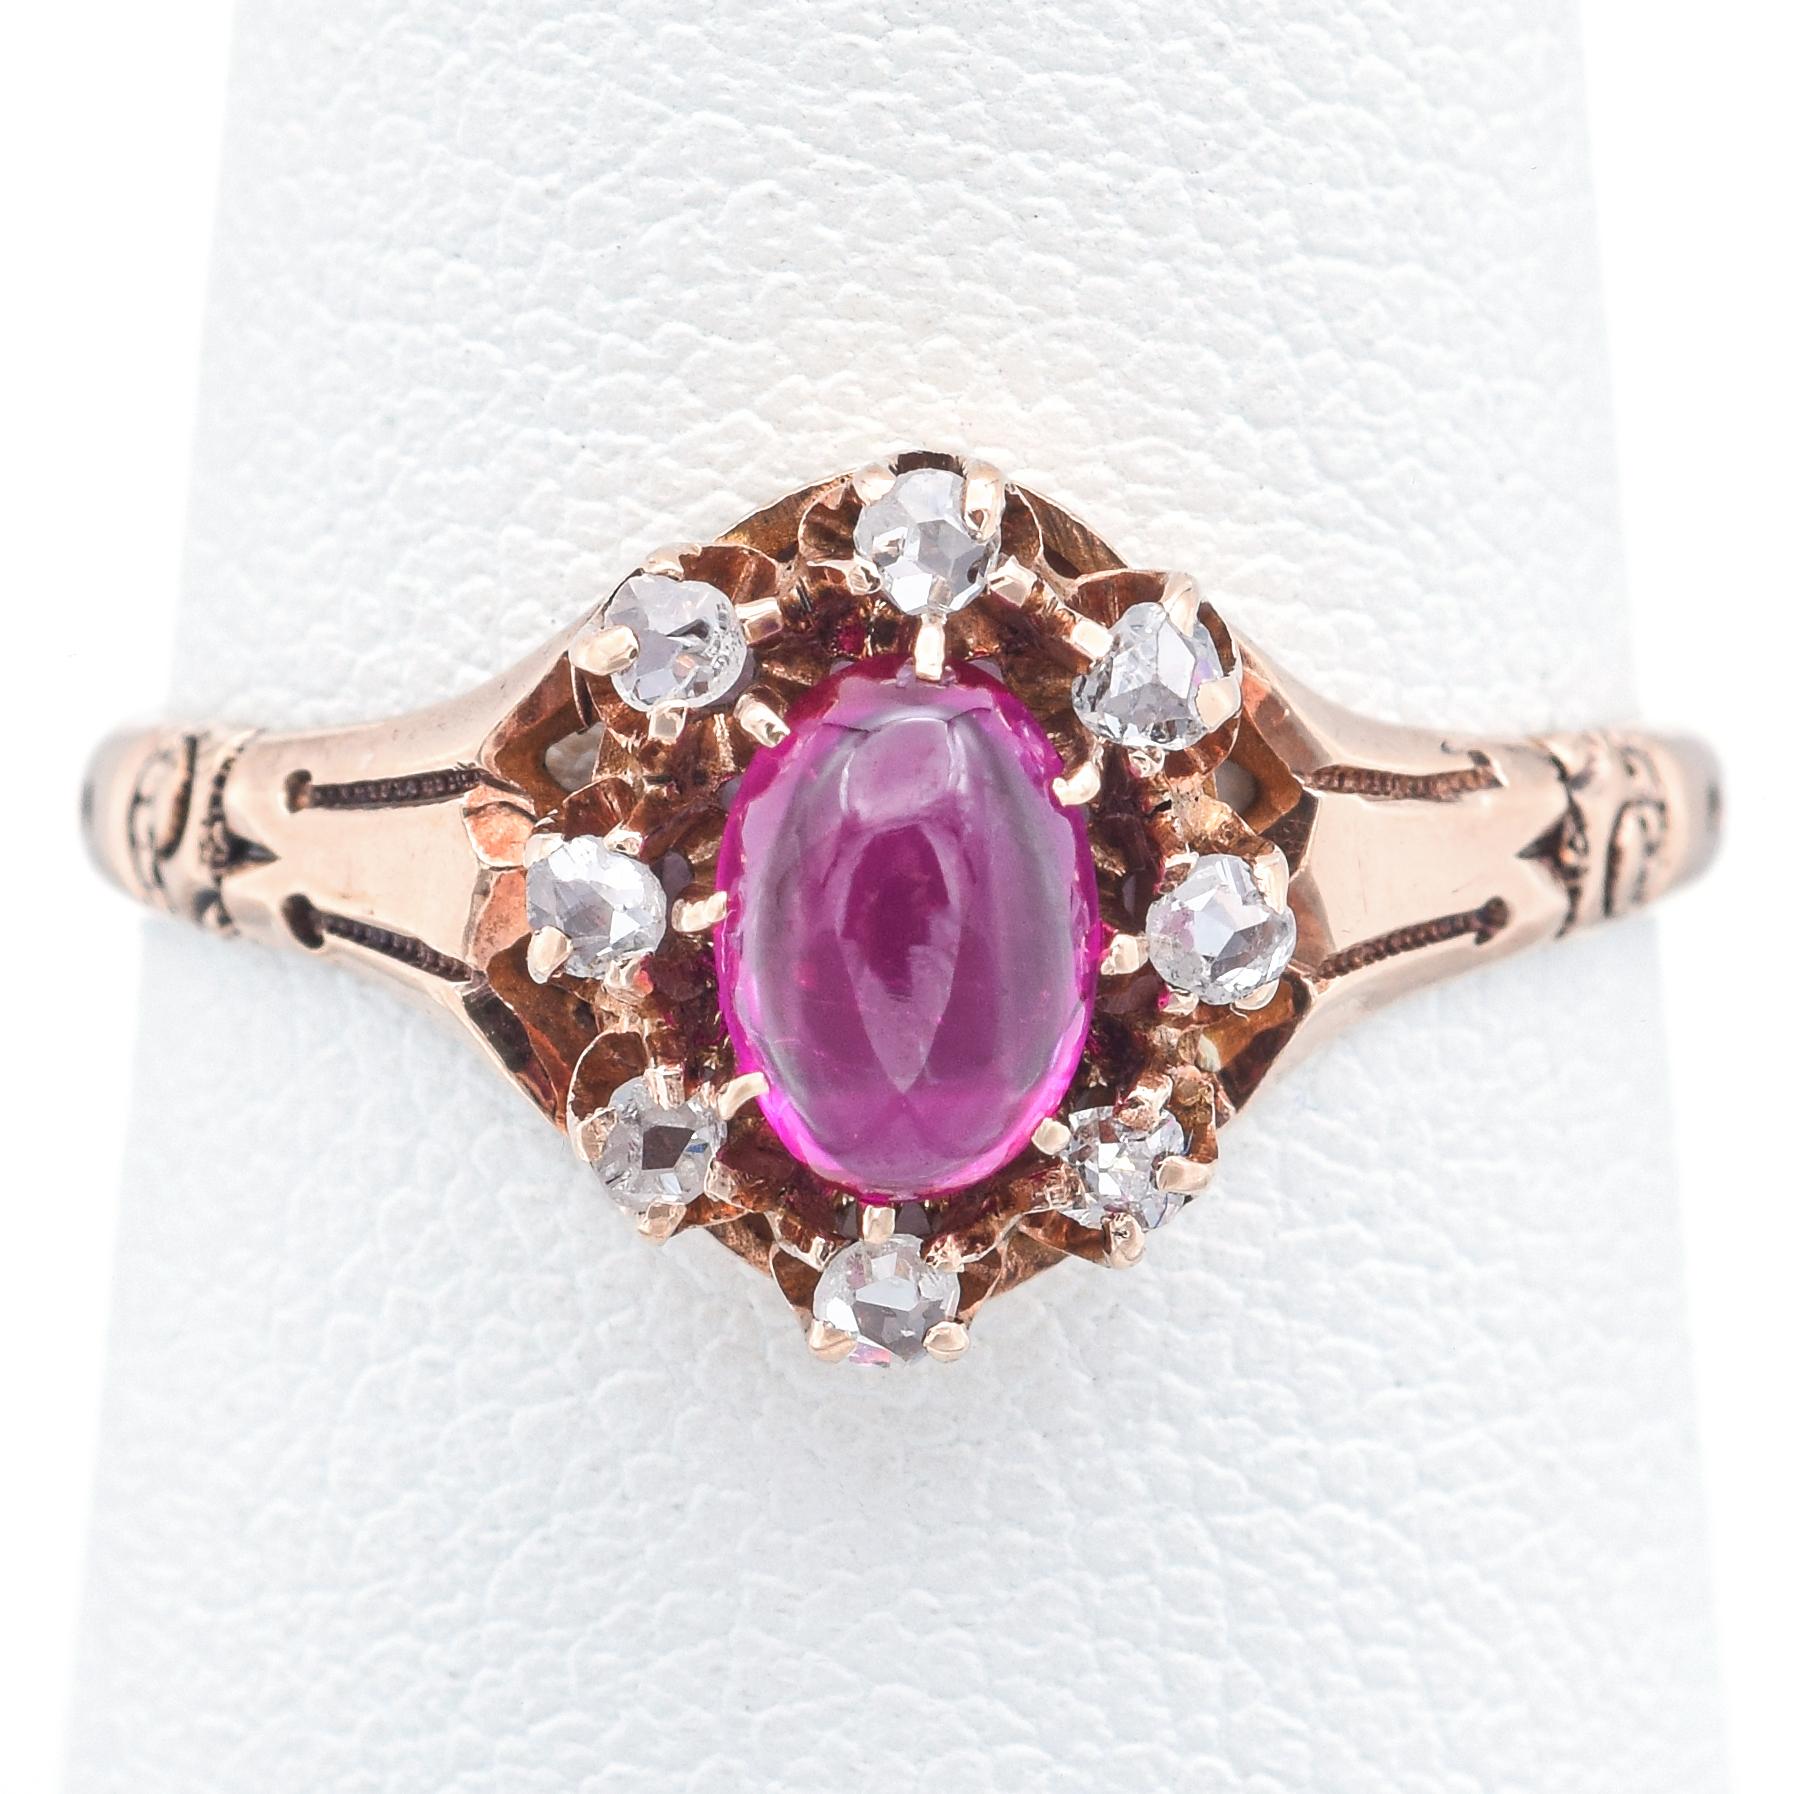 Weight: 1.9 Grams
Stone: Ruby (6x4 mm) & Accent Diamond (1.6-1.75 mm)
Face of Ring: 19.5 x 10.5 x 6.0 mm
Size: 7
Hallmark: 10K Tested

ITEM #:BR-1078-101823-01